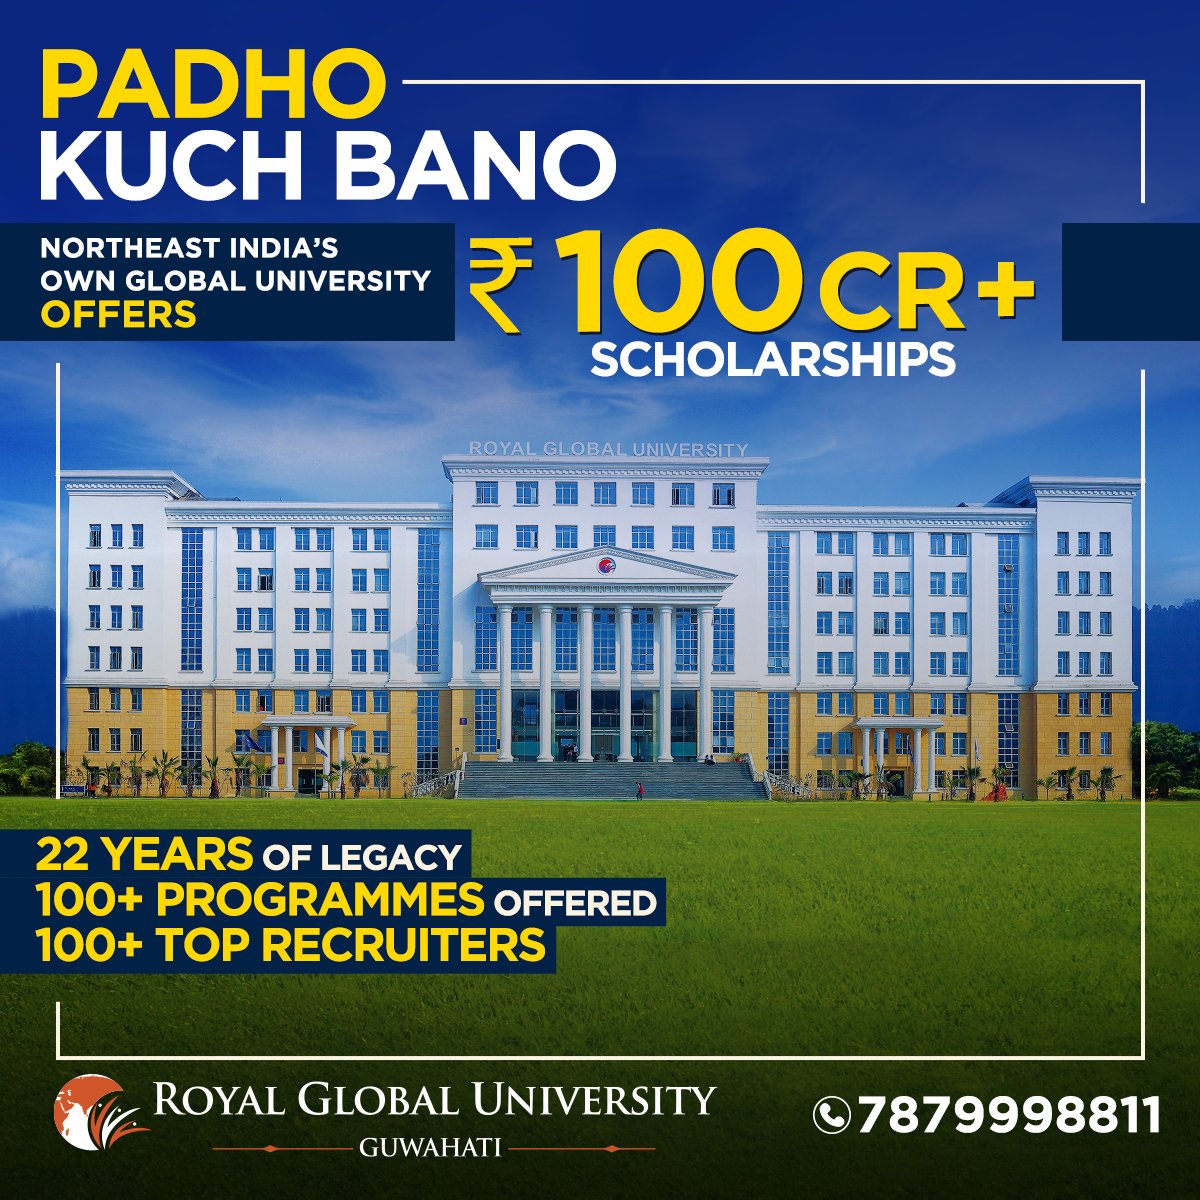 #Scholarships of more than ₹100 Cr await you. #EnrollNow and experience excellence in education! #RGU #NorthEast #Assam #BestUniversity #GlobalUniversity #HigherStudies #BecomeSomeone #ChangeDestiny #BestCampus #BrightFuture #Placement #RoyalGlobalUniversity